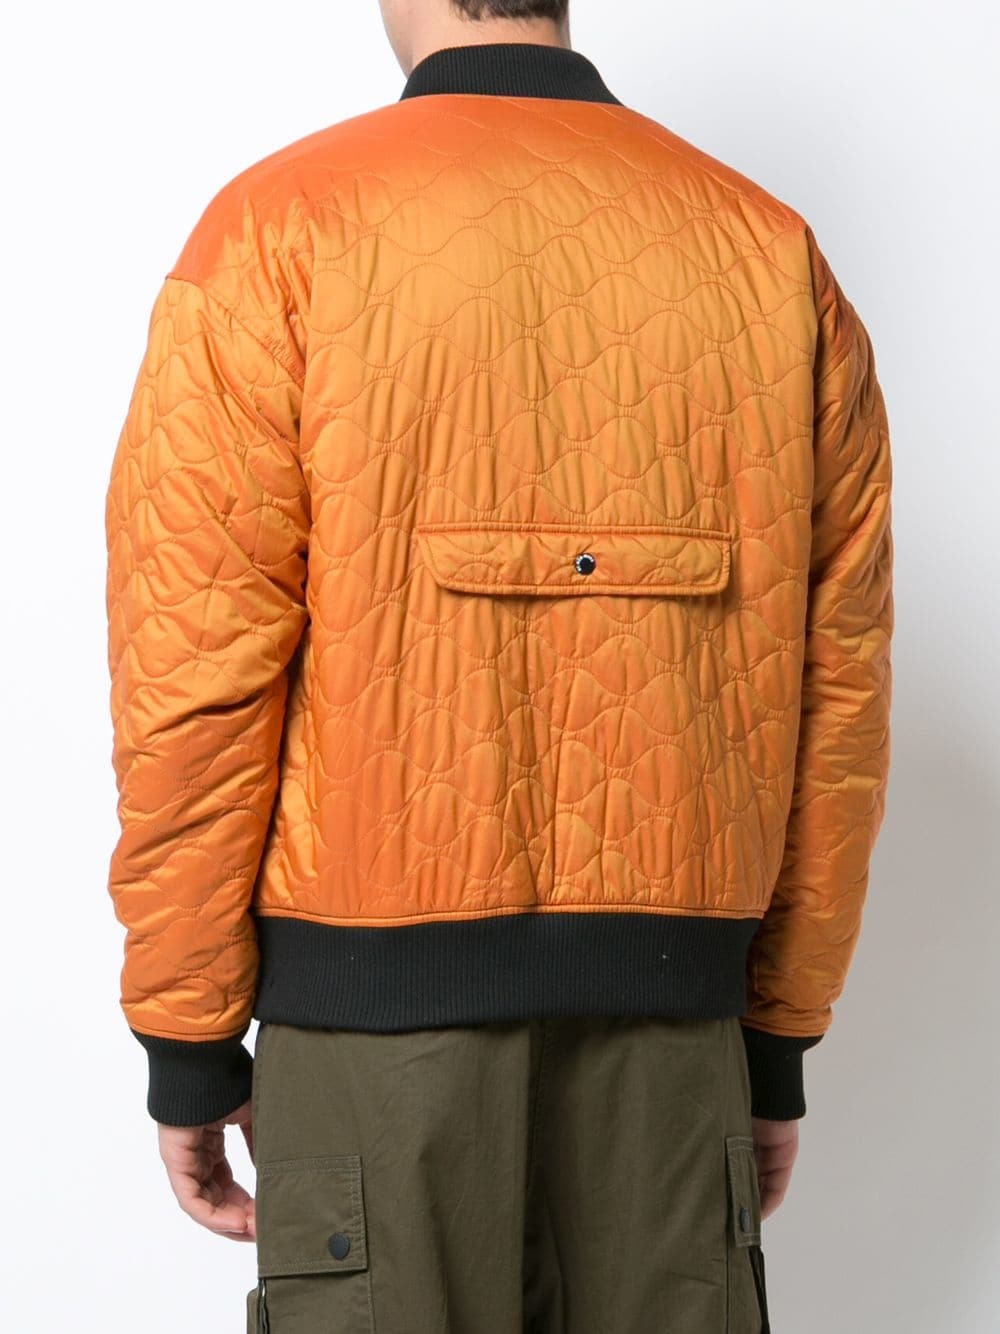 Mostly Heard Rarely Seen Quilted Bomber Jacket, $417 | farfetch.com ...